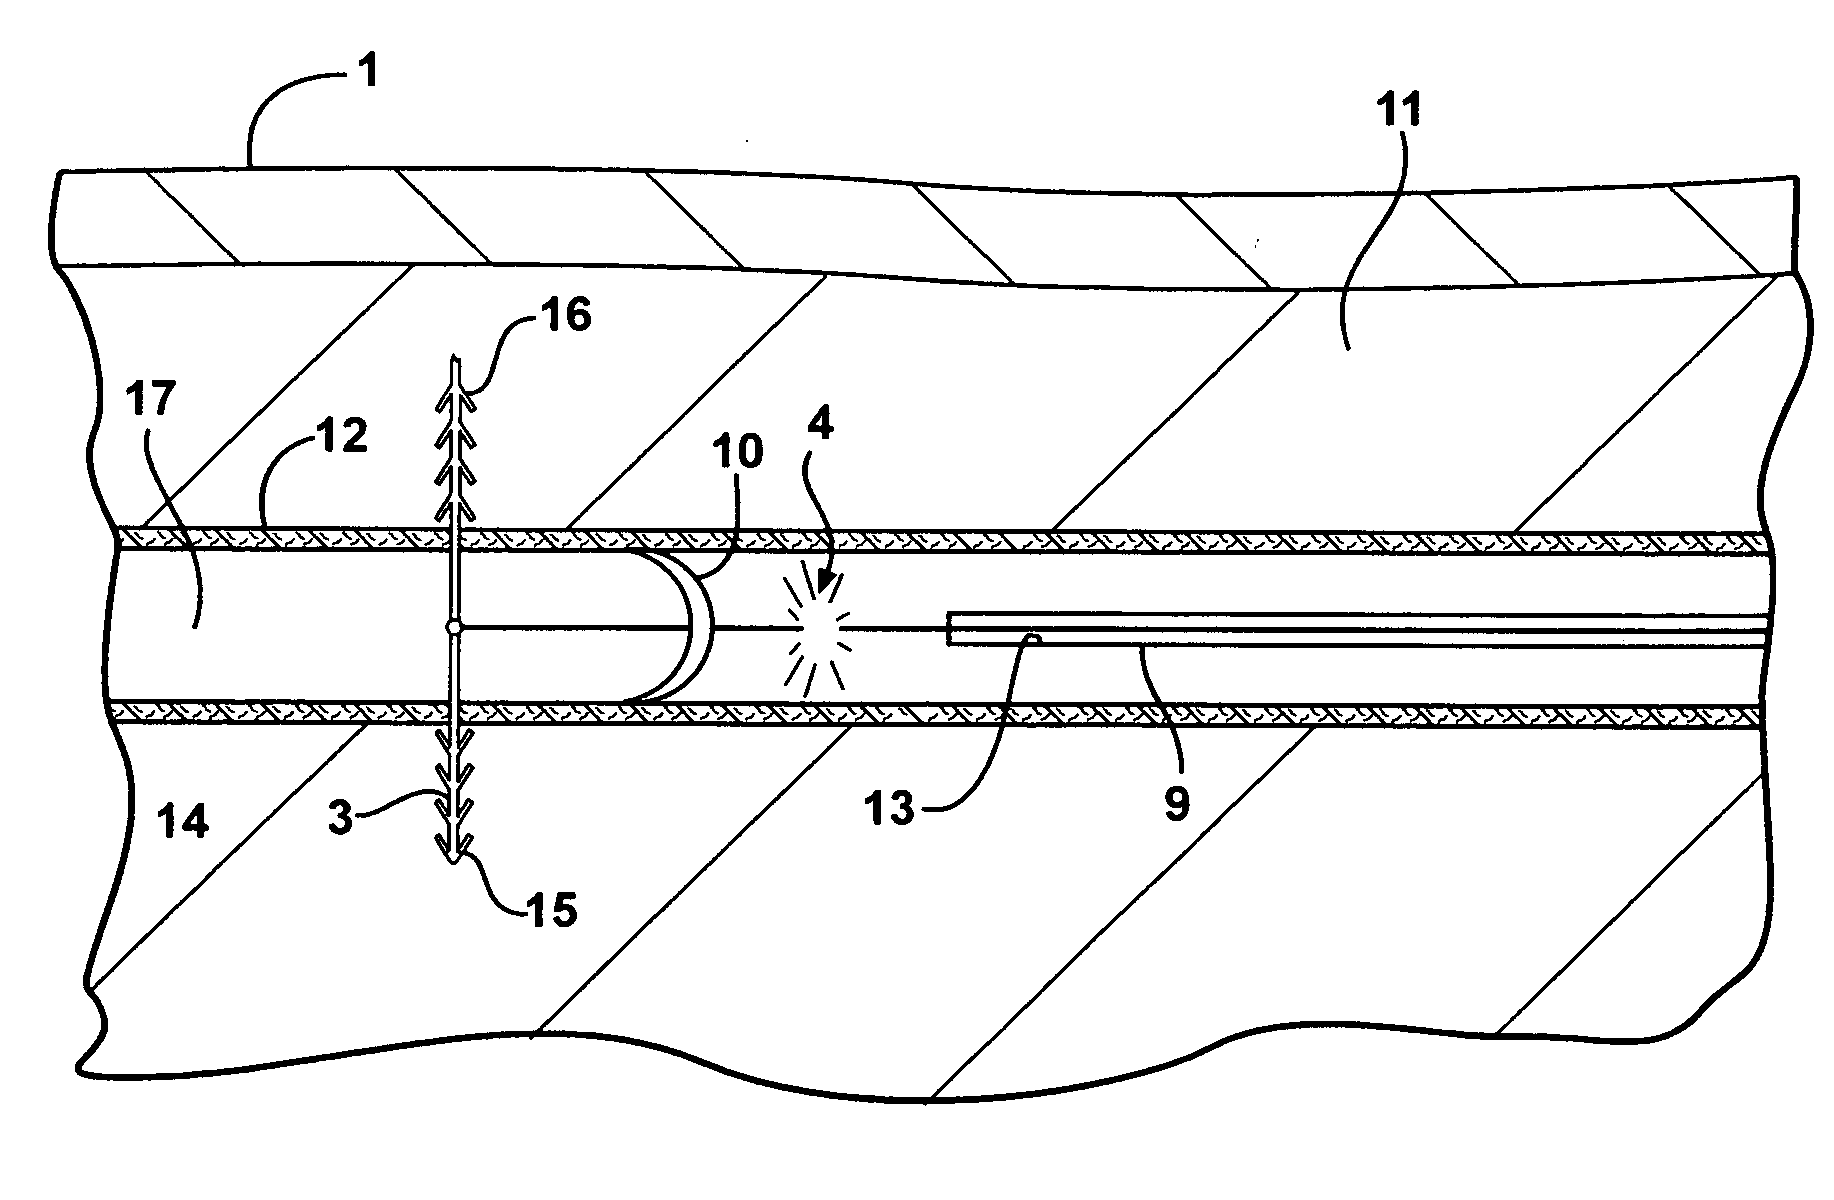 Methods and apparatus for utilization of barbed sutures in human tissue including a method for eliminating or improving blood flow in veins